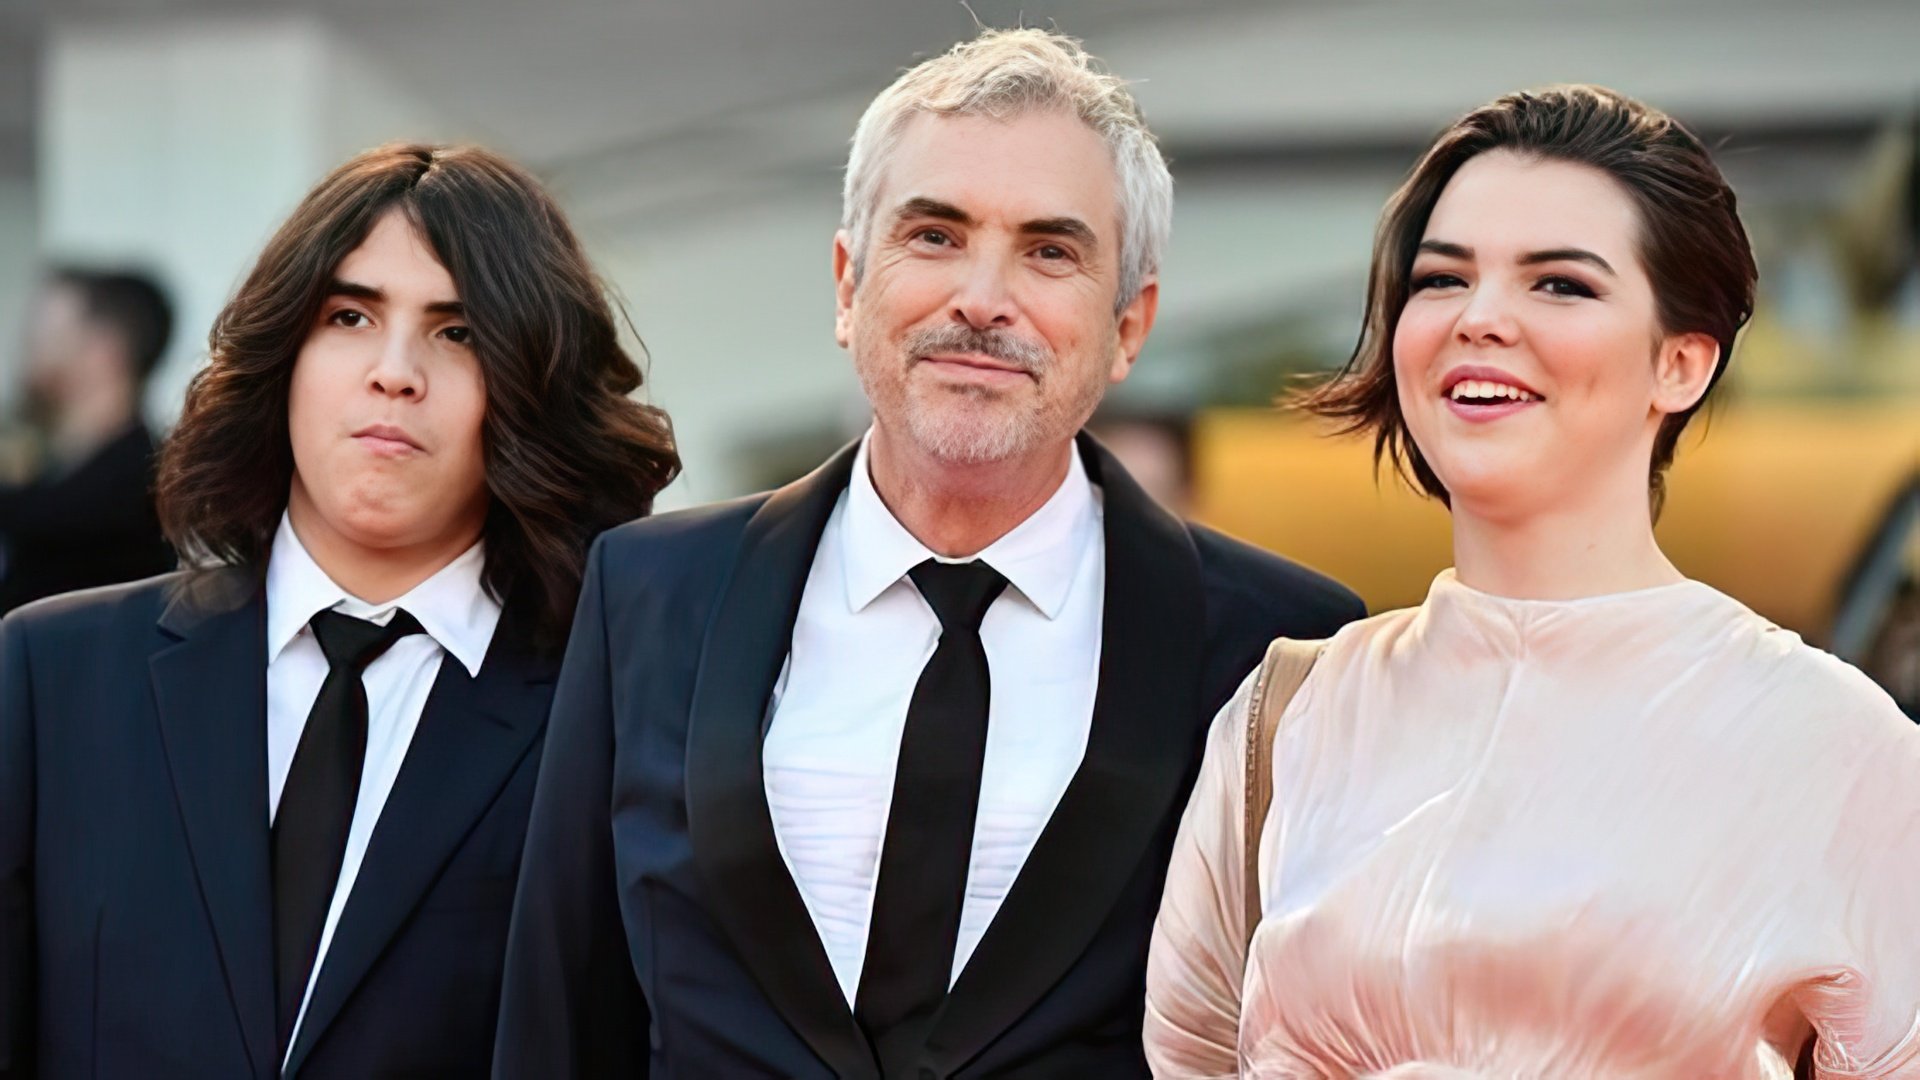 Alfonso Cuarón with his son Olmo and daughter Tess